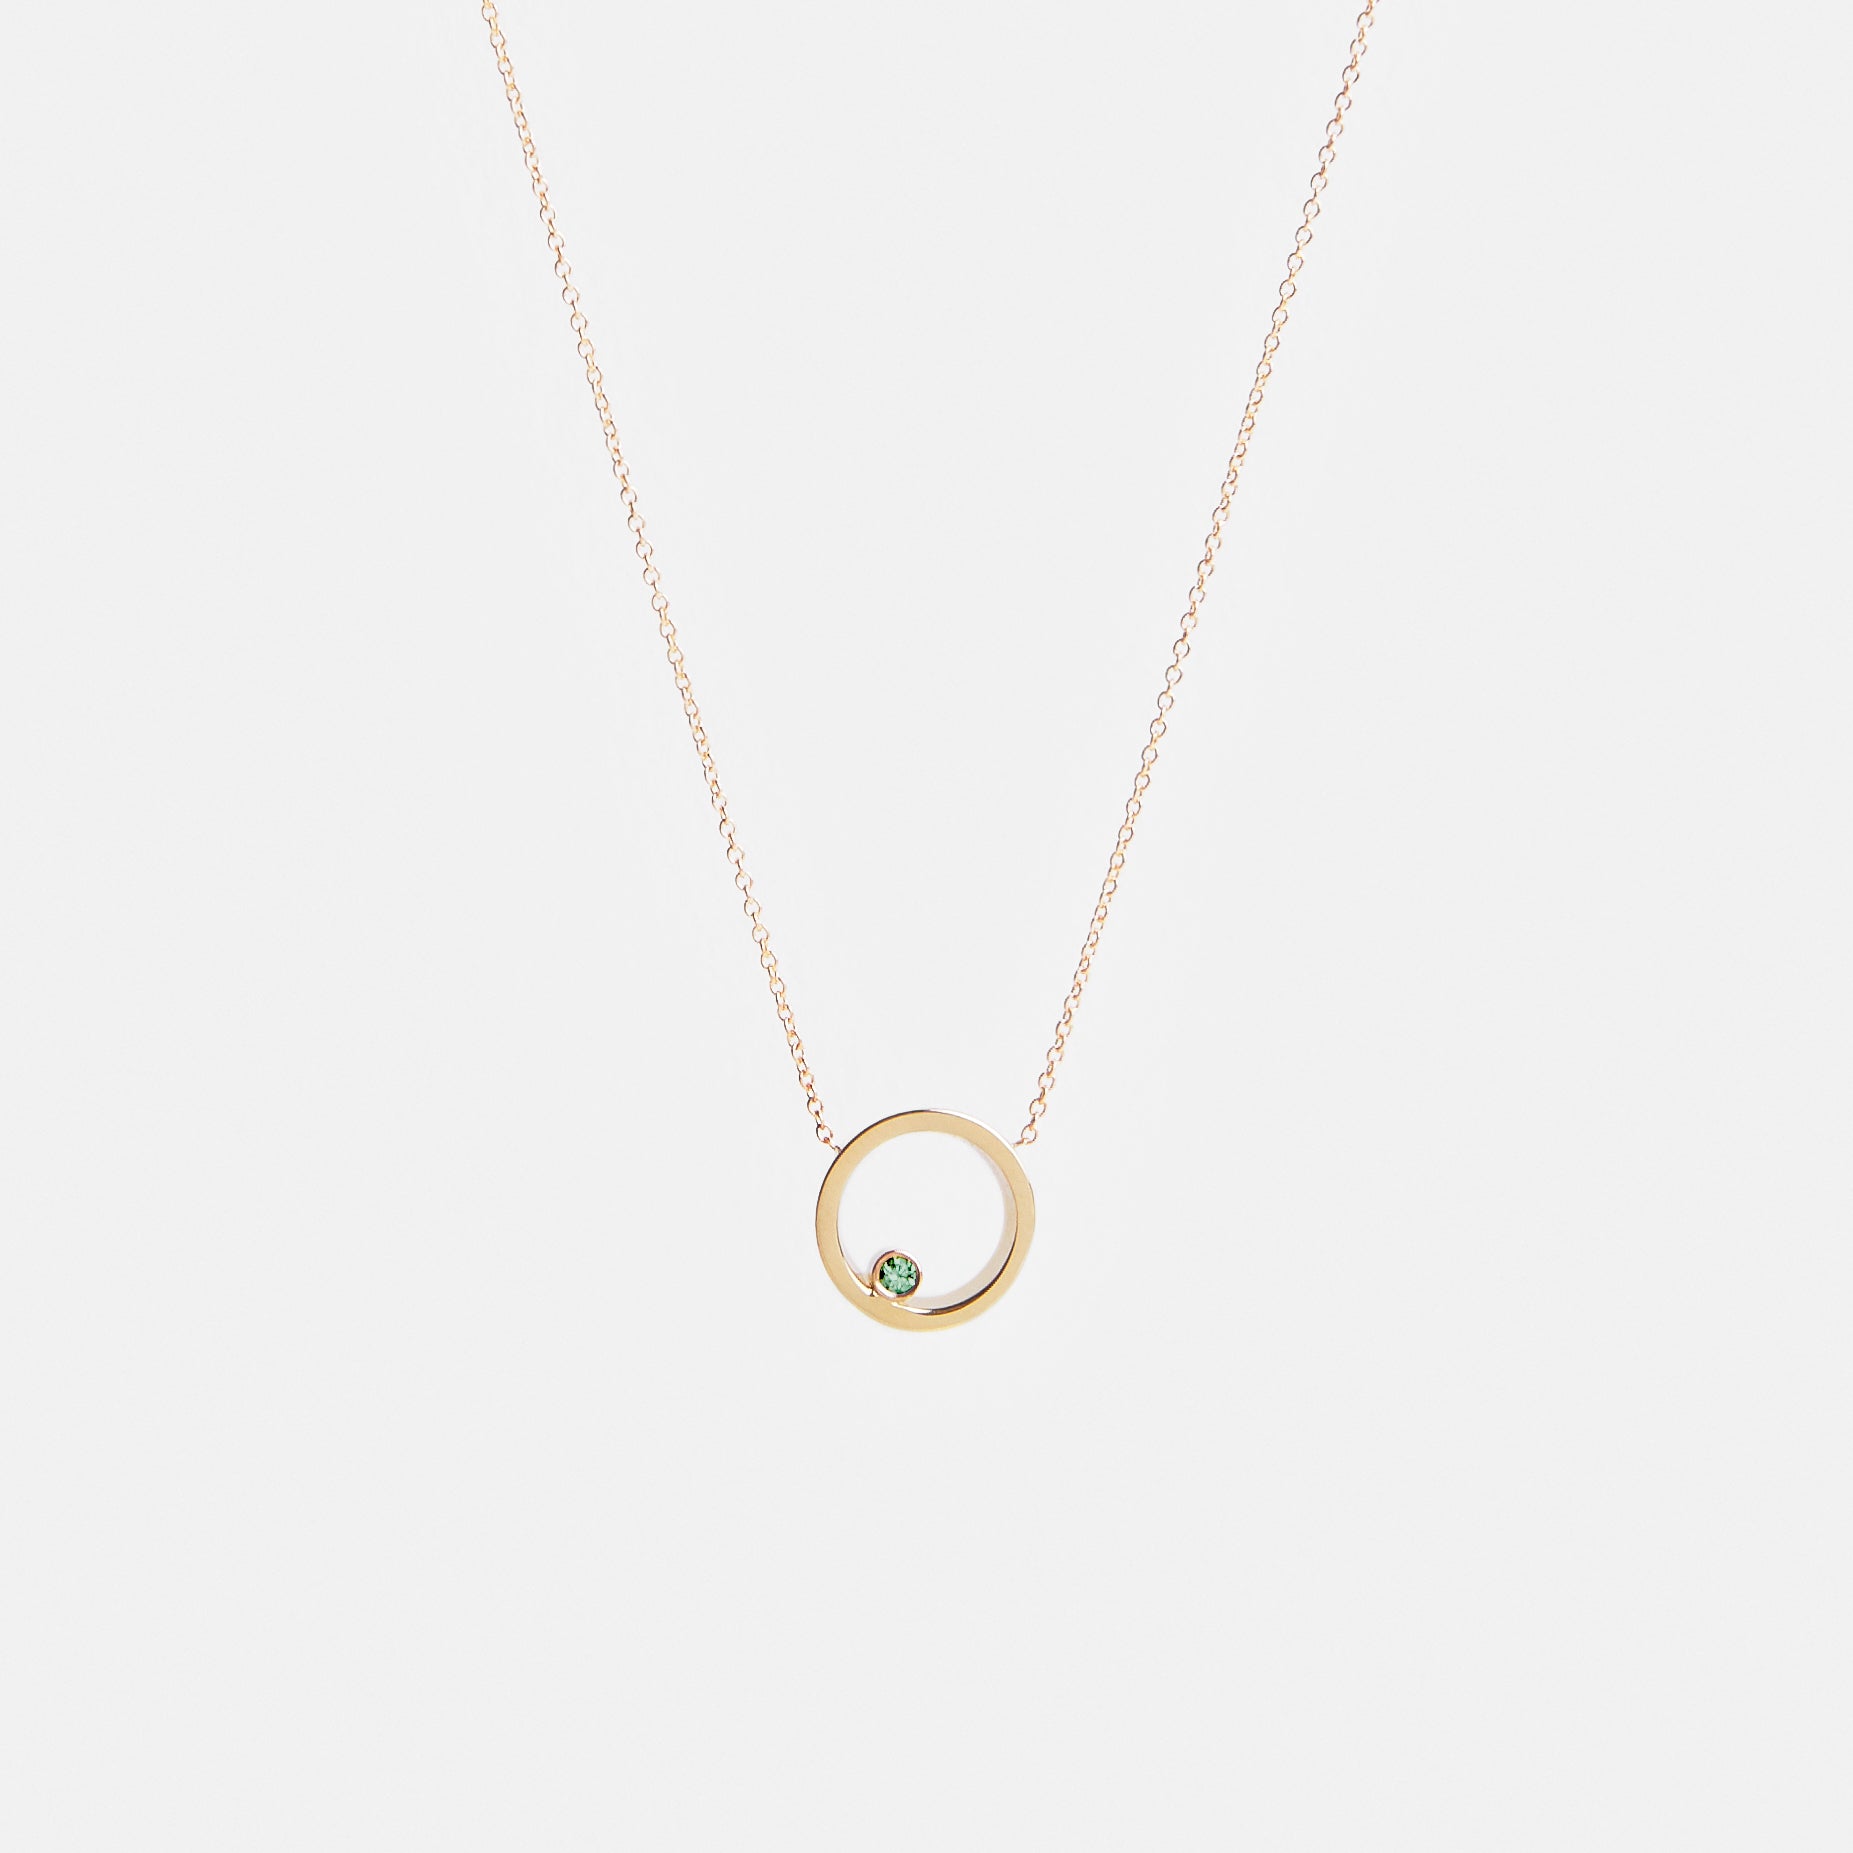 la Designer Necklace in 14k Gold set with Green Diamond By SHW Fine Jewelry NYC